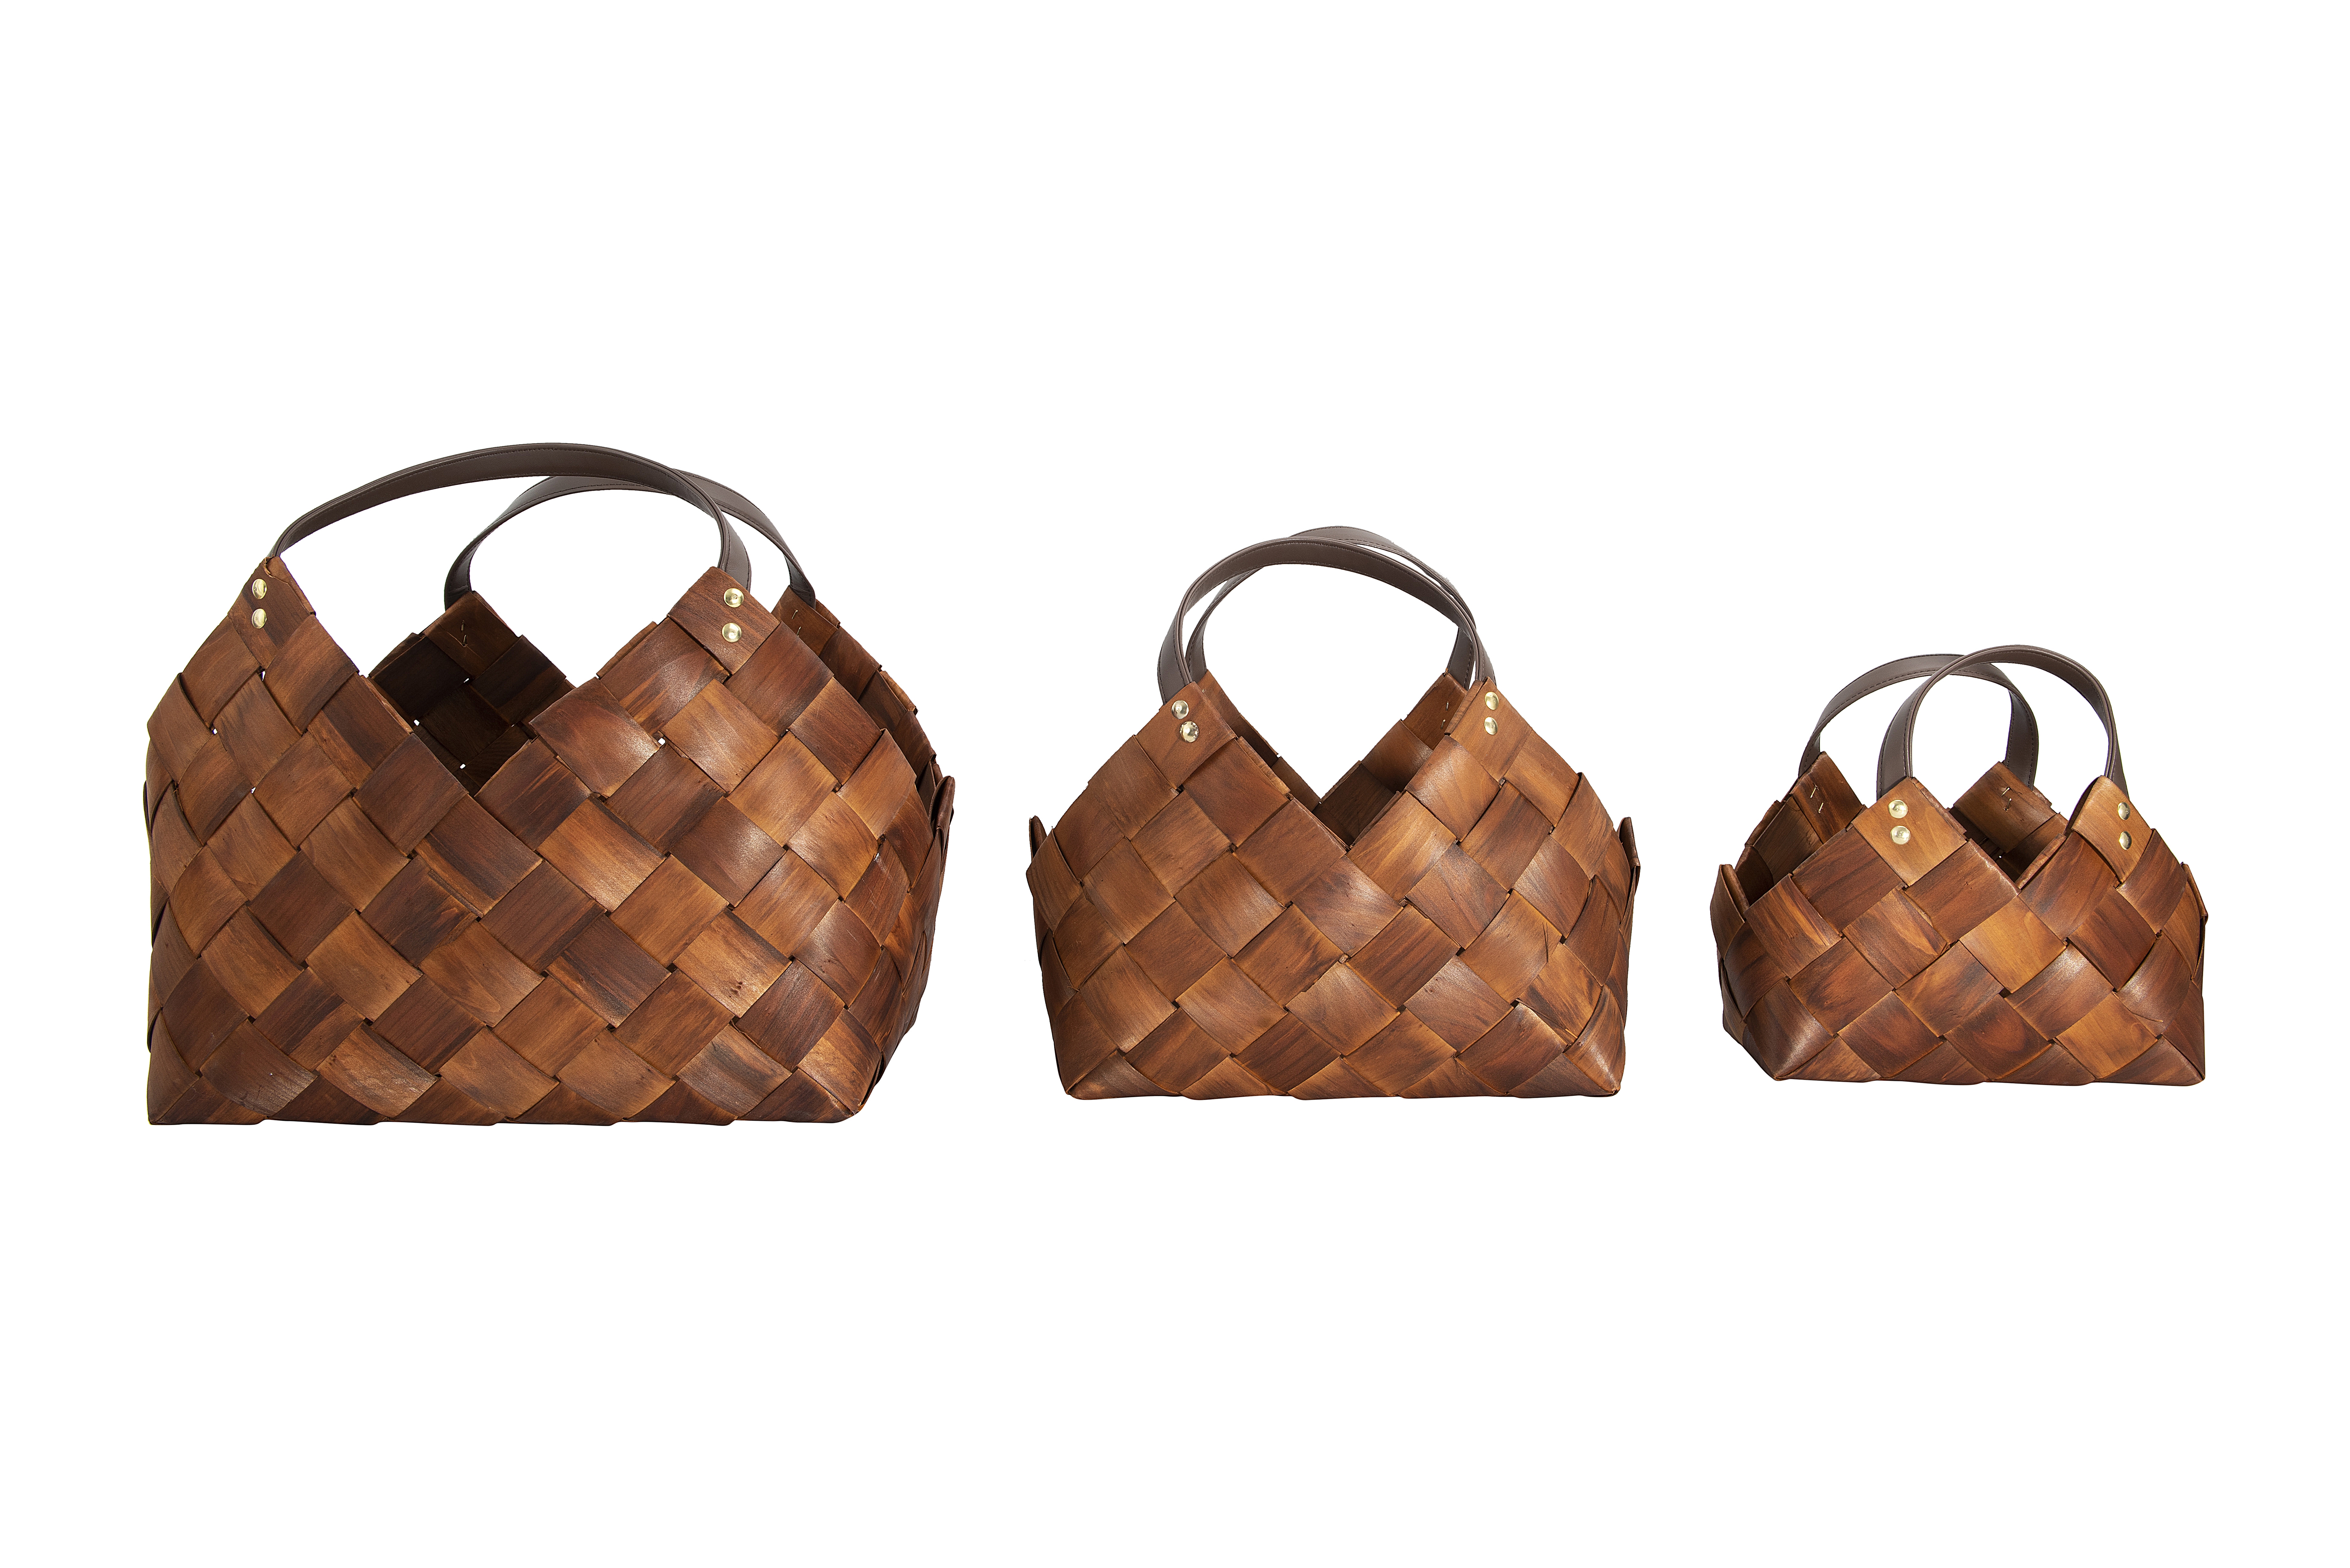 Brown Woven Seagrass Baskets with Leather Handles (Set of 3 Sizes) - Nomad Home